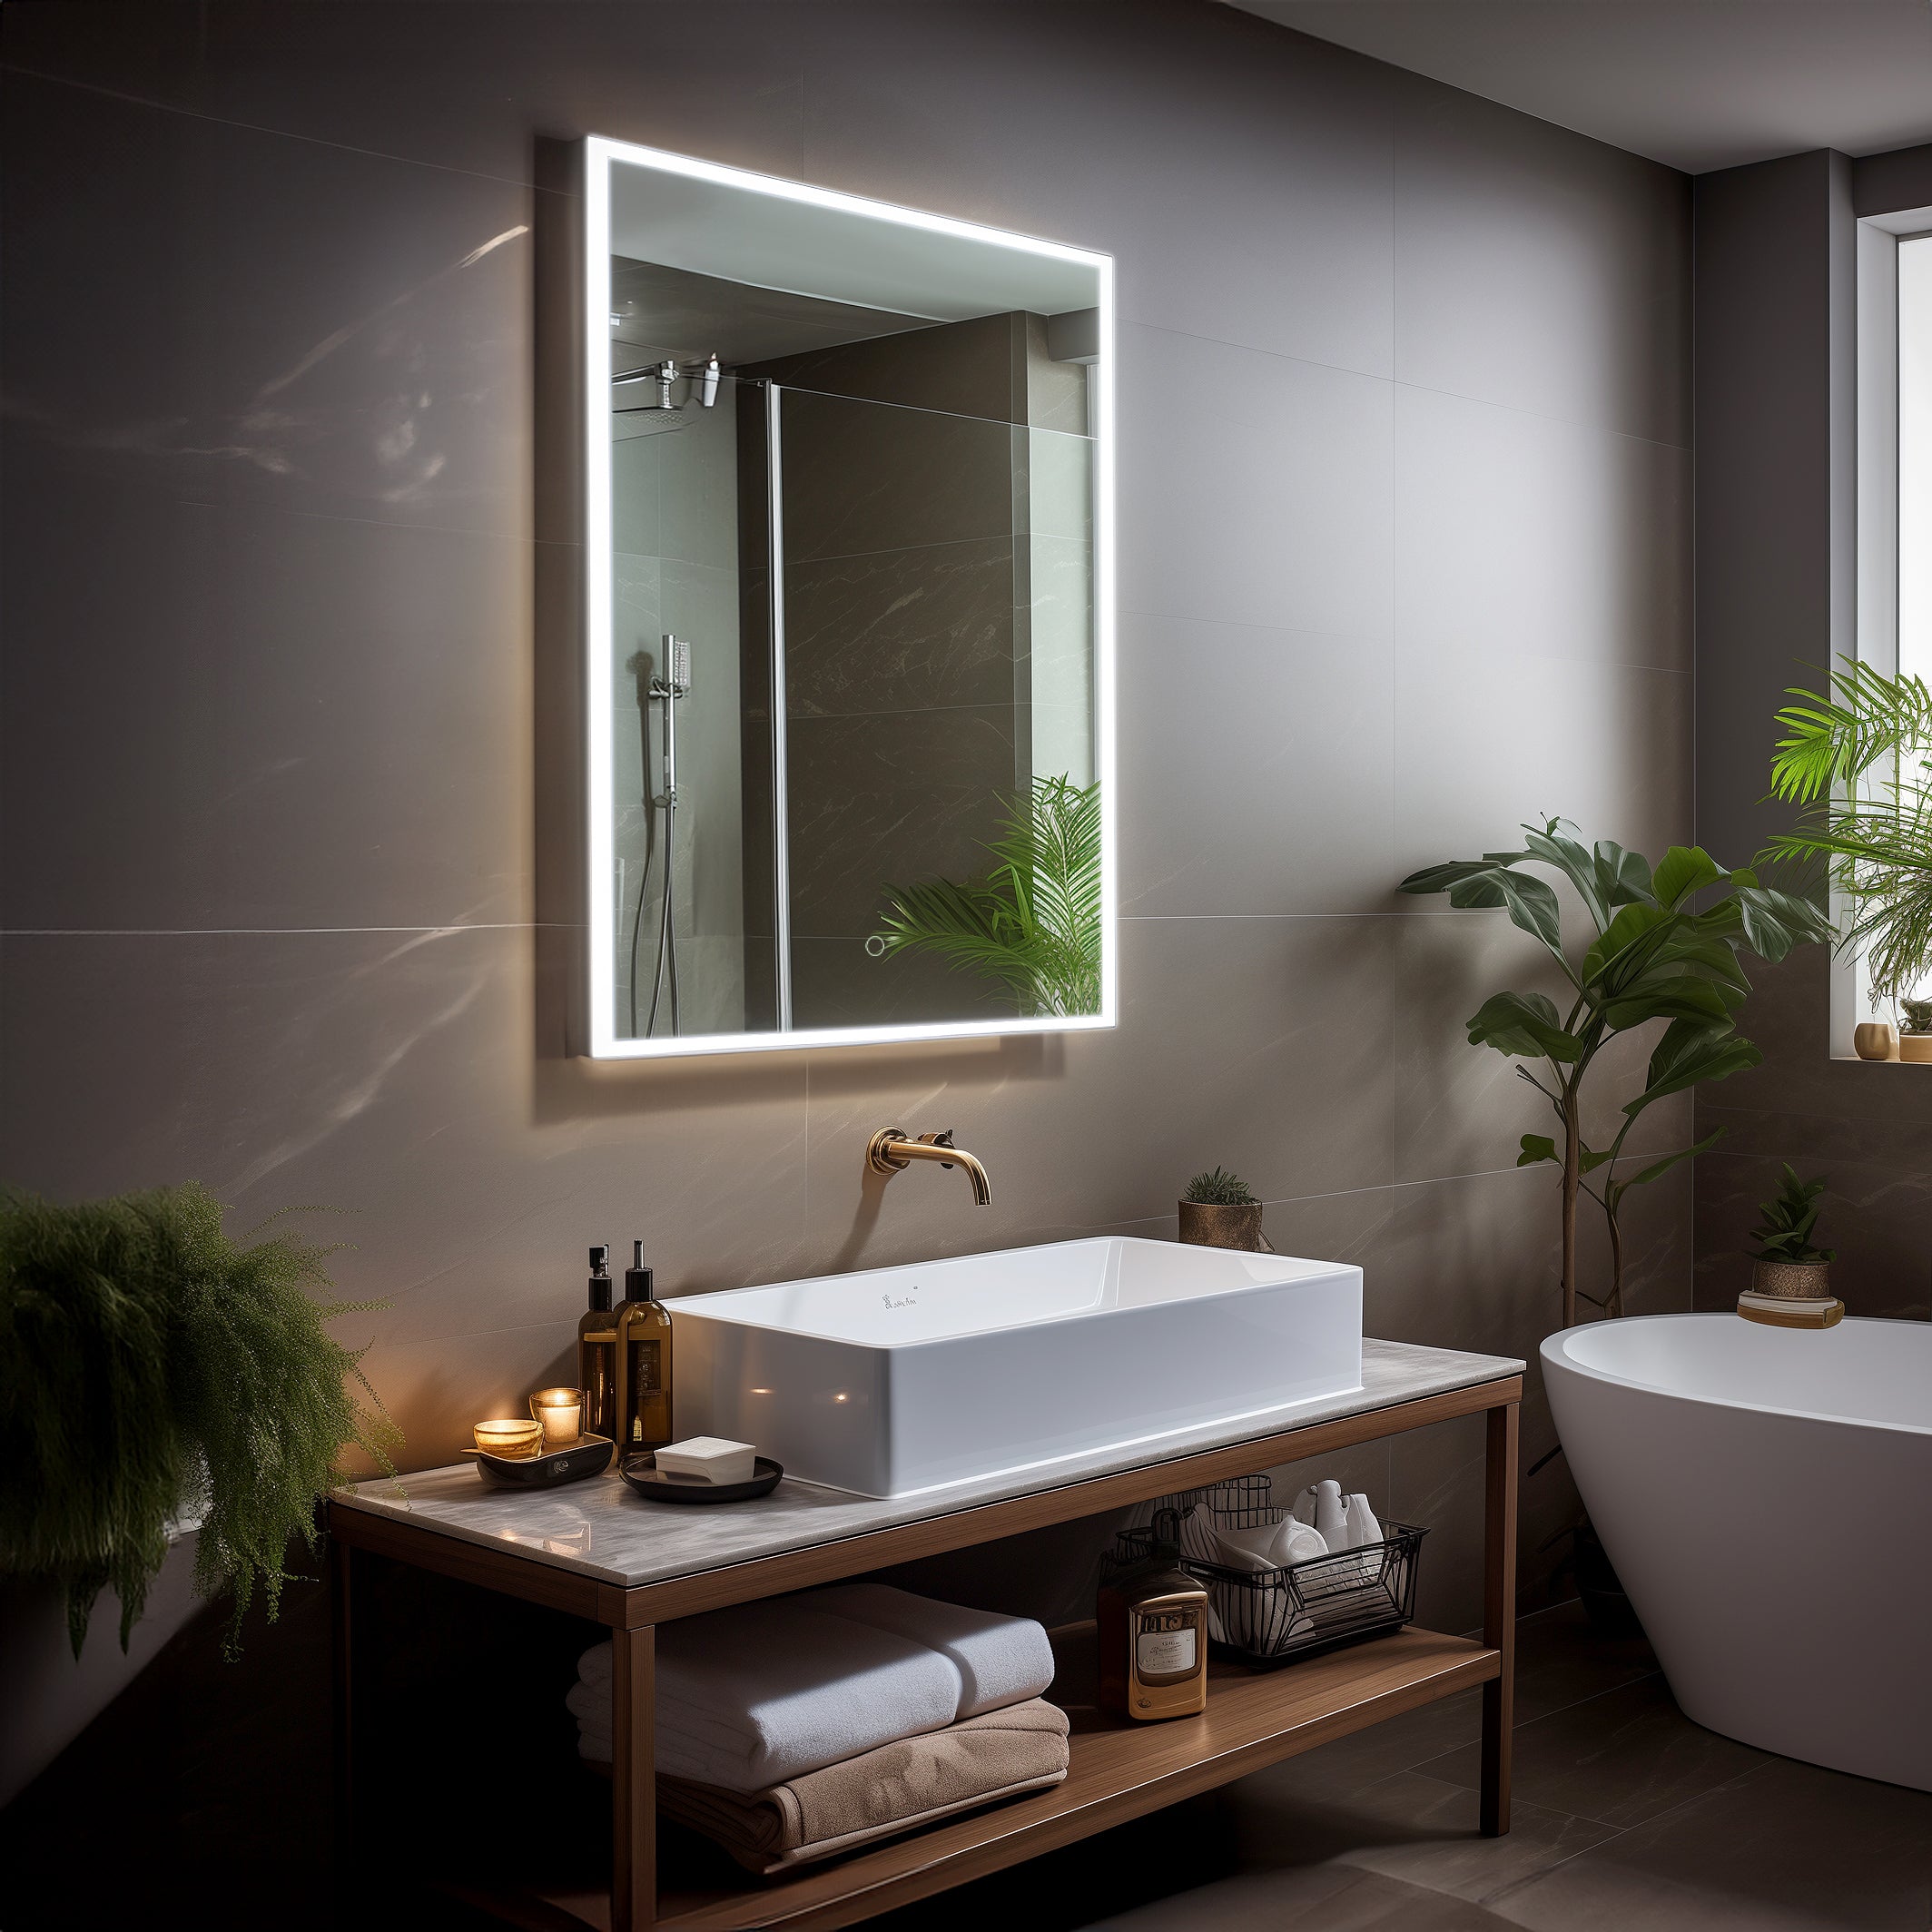 Modern bathroom interior with a backlit mirror above a sleek vanity, complete with neatly arranged towels and toiletries, and a touch of greenery for a contemporary vibe.